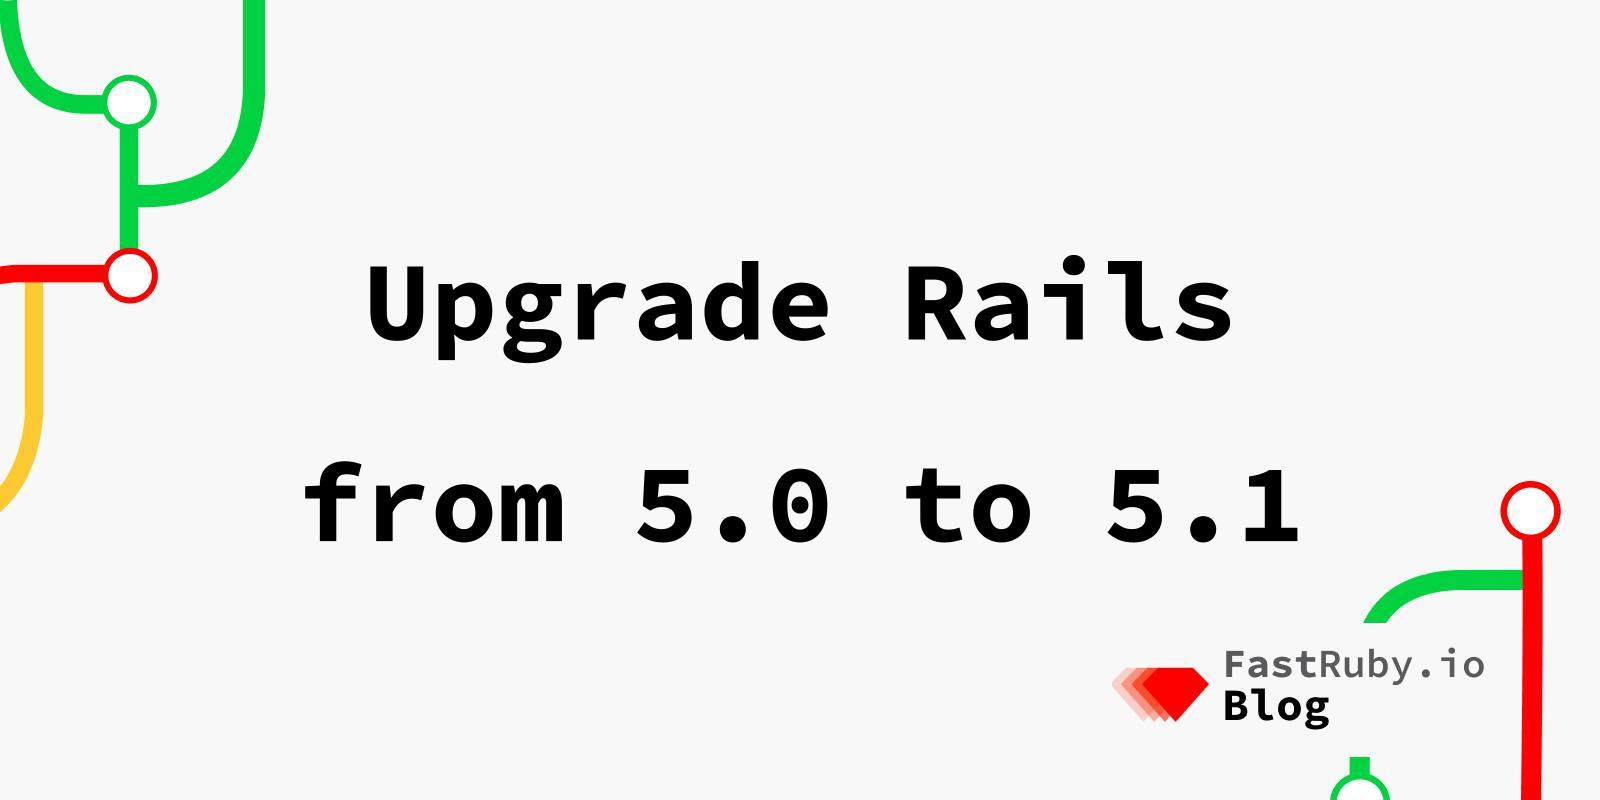 Upgrade Rails from 5.0 to 5.1